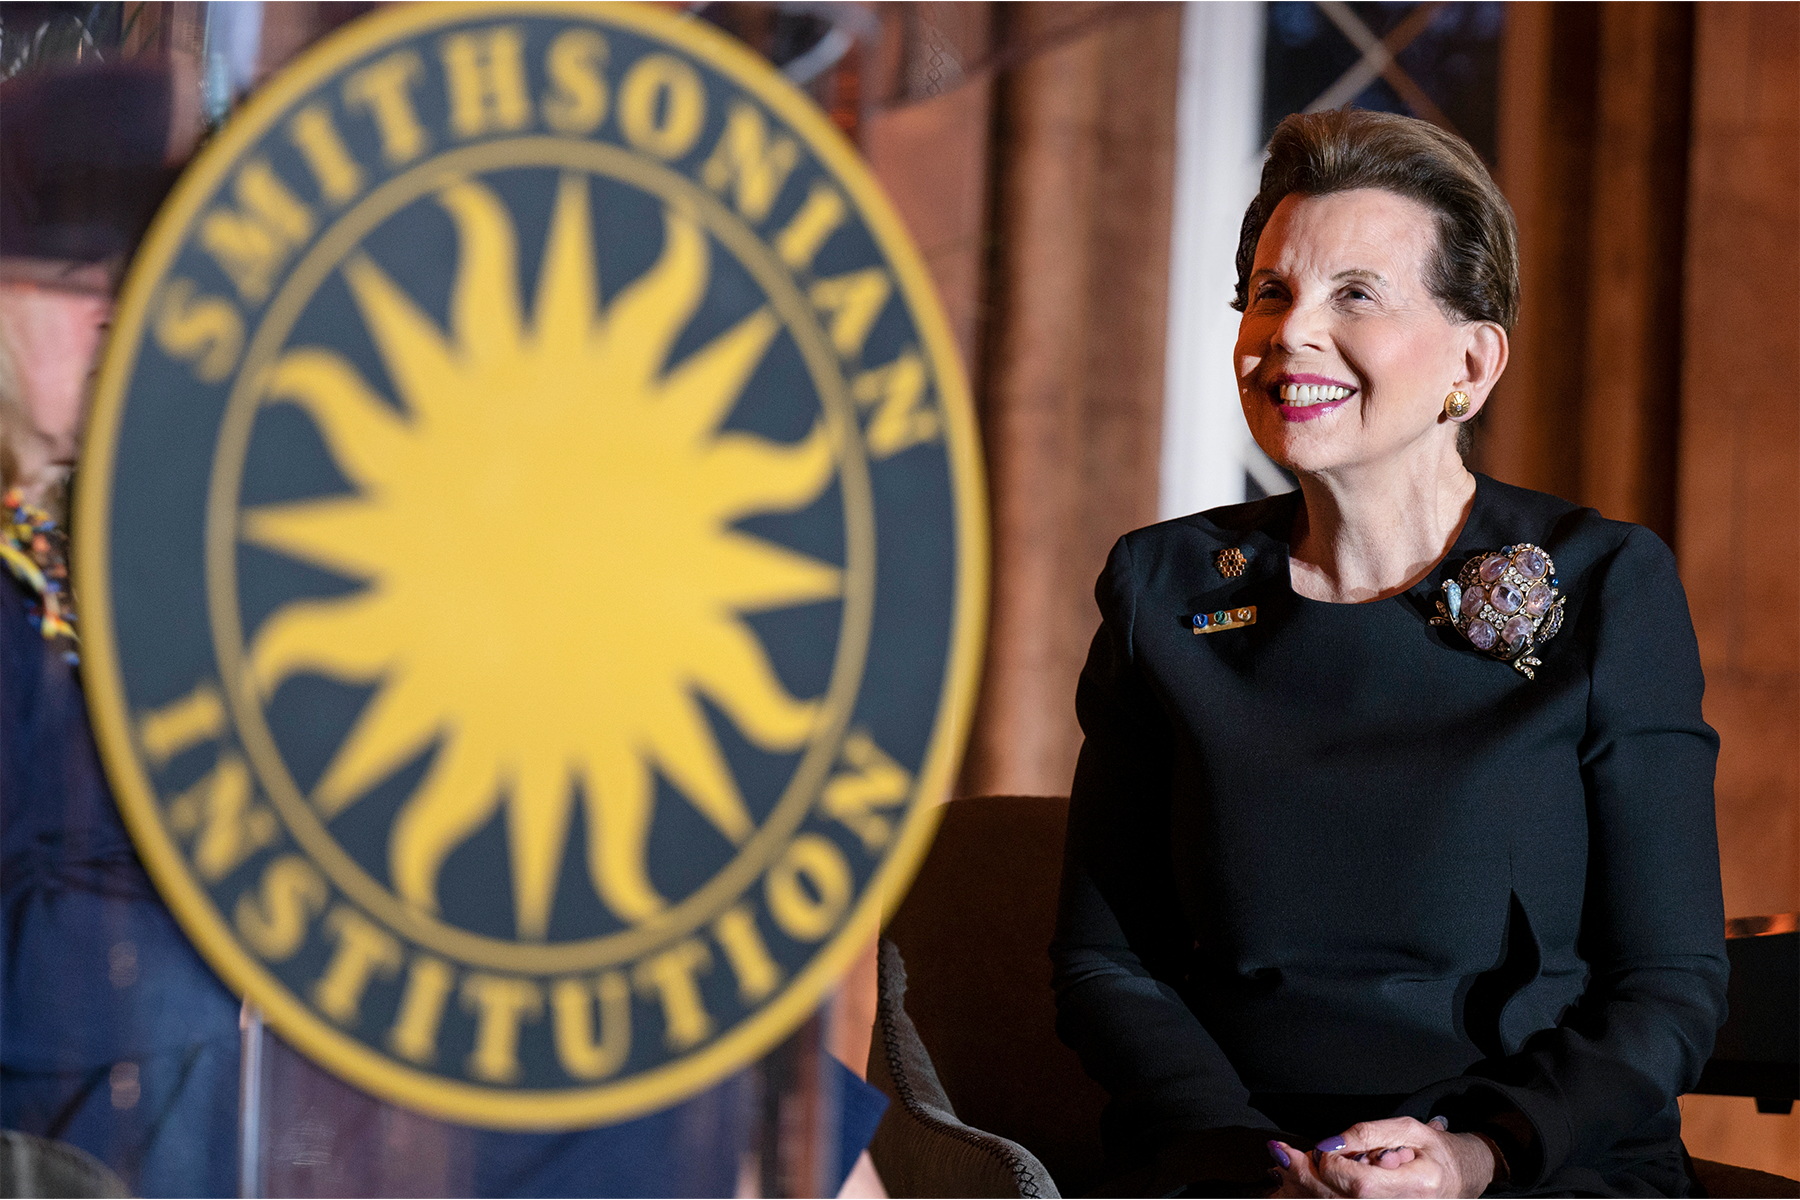 Adrienne Arsht wearing a black, long-sleeved dress with bejeweled frog broach standing next to the Smithsonian logo